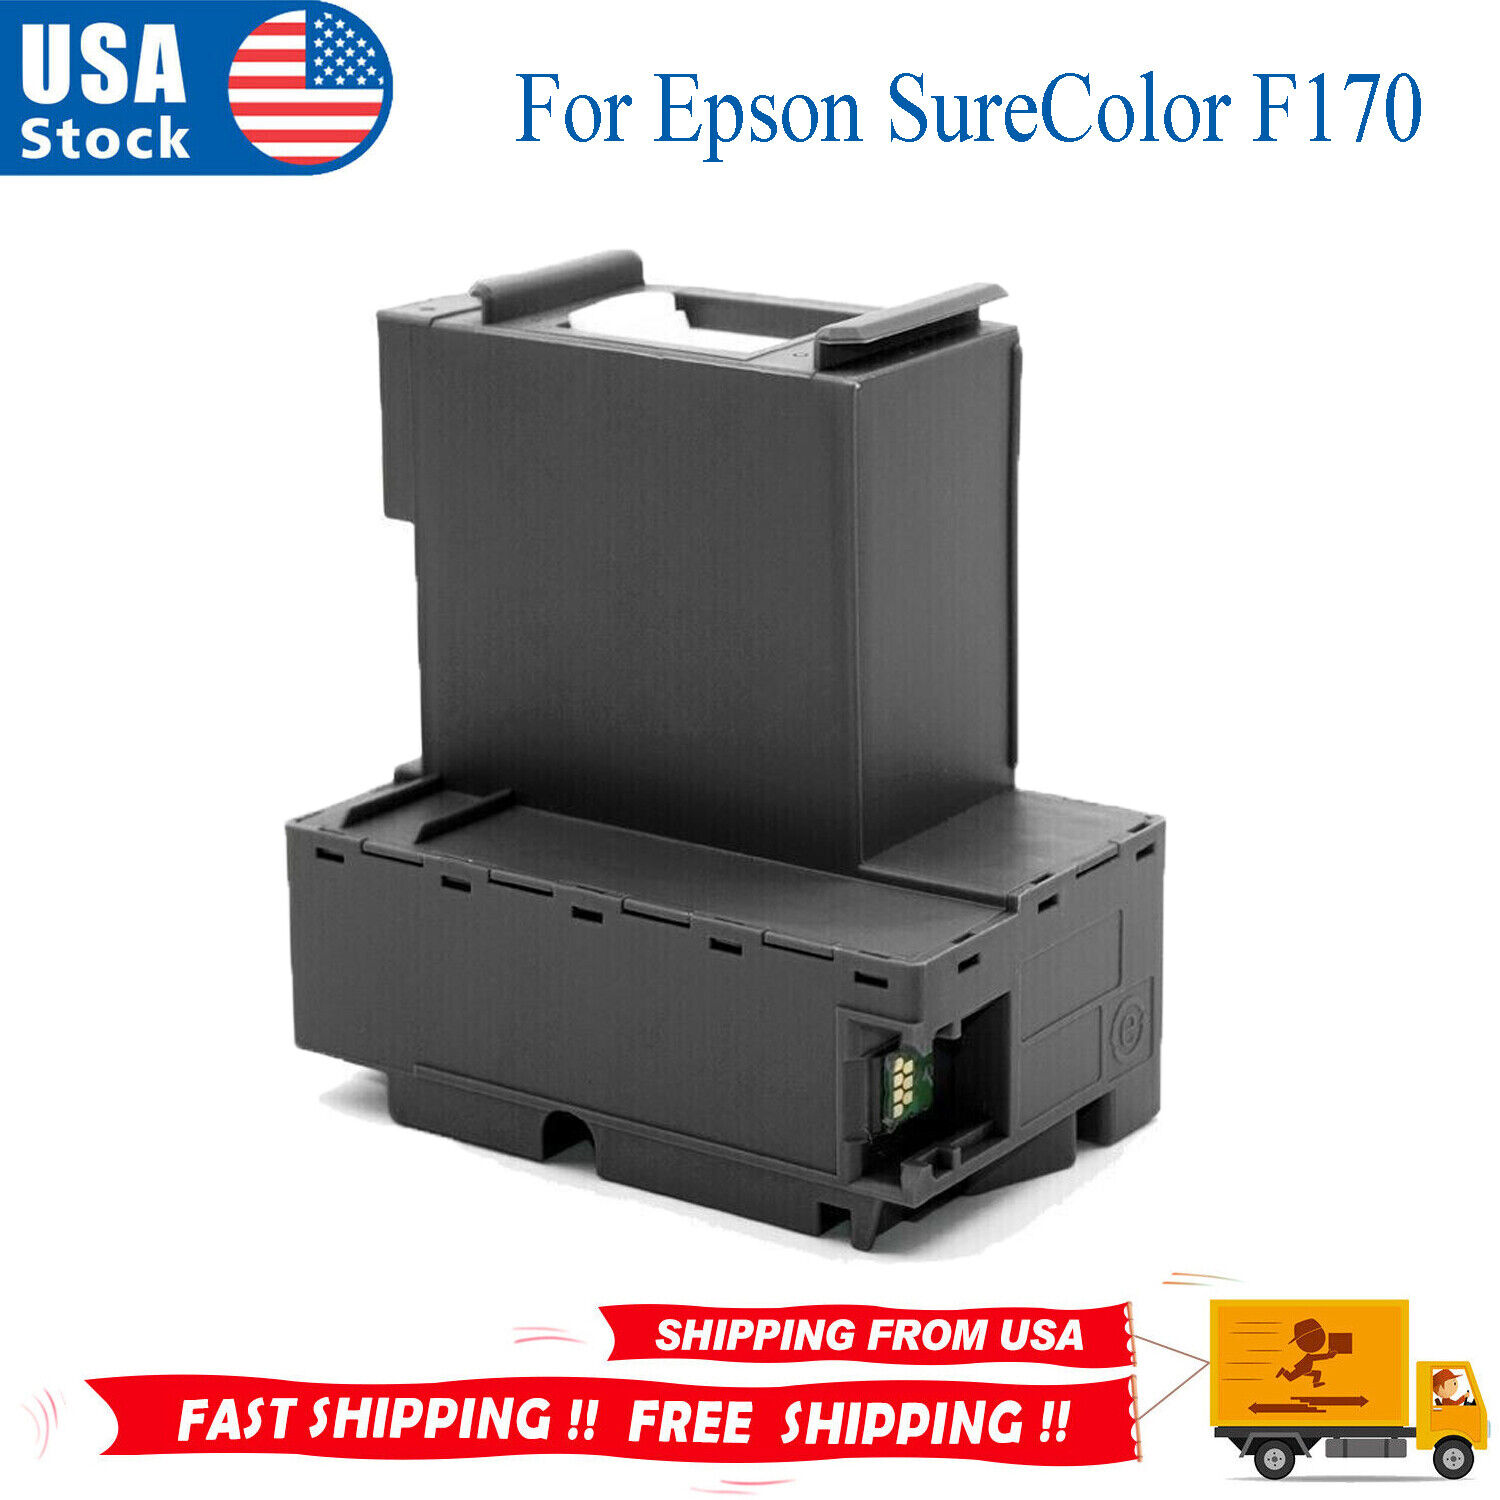 S2101 Maintenance Ink Box For Epson SureColor F170 Printer Waste Ink Tank US